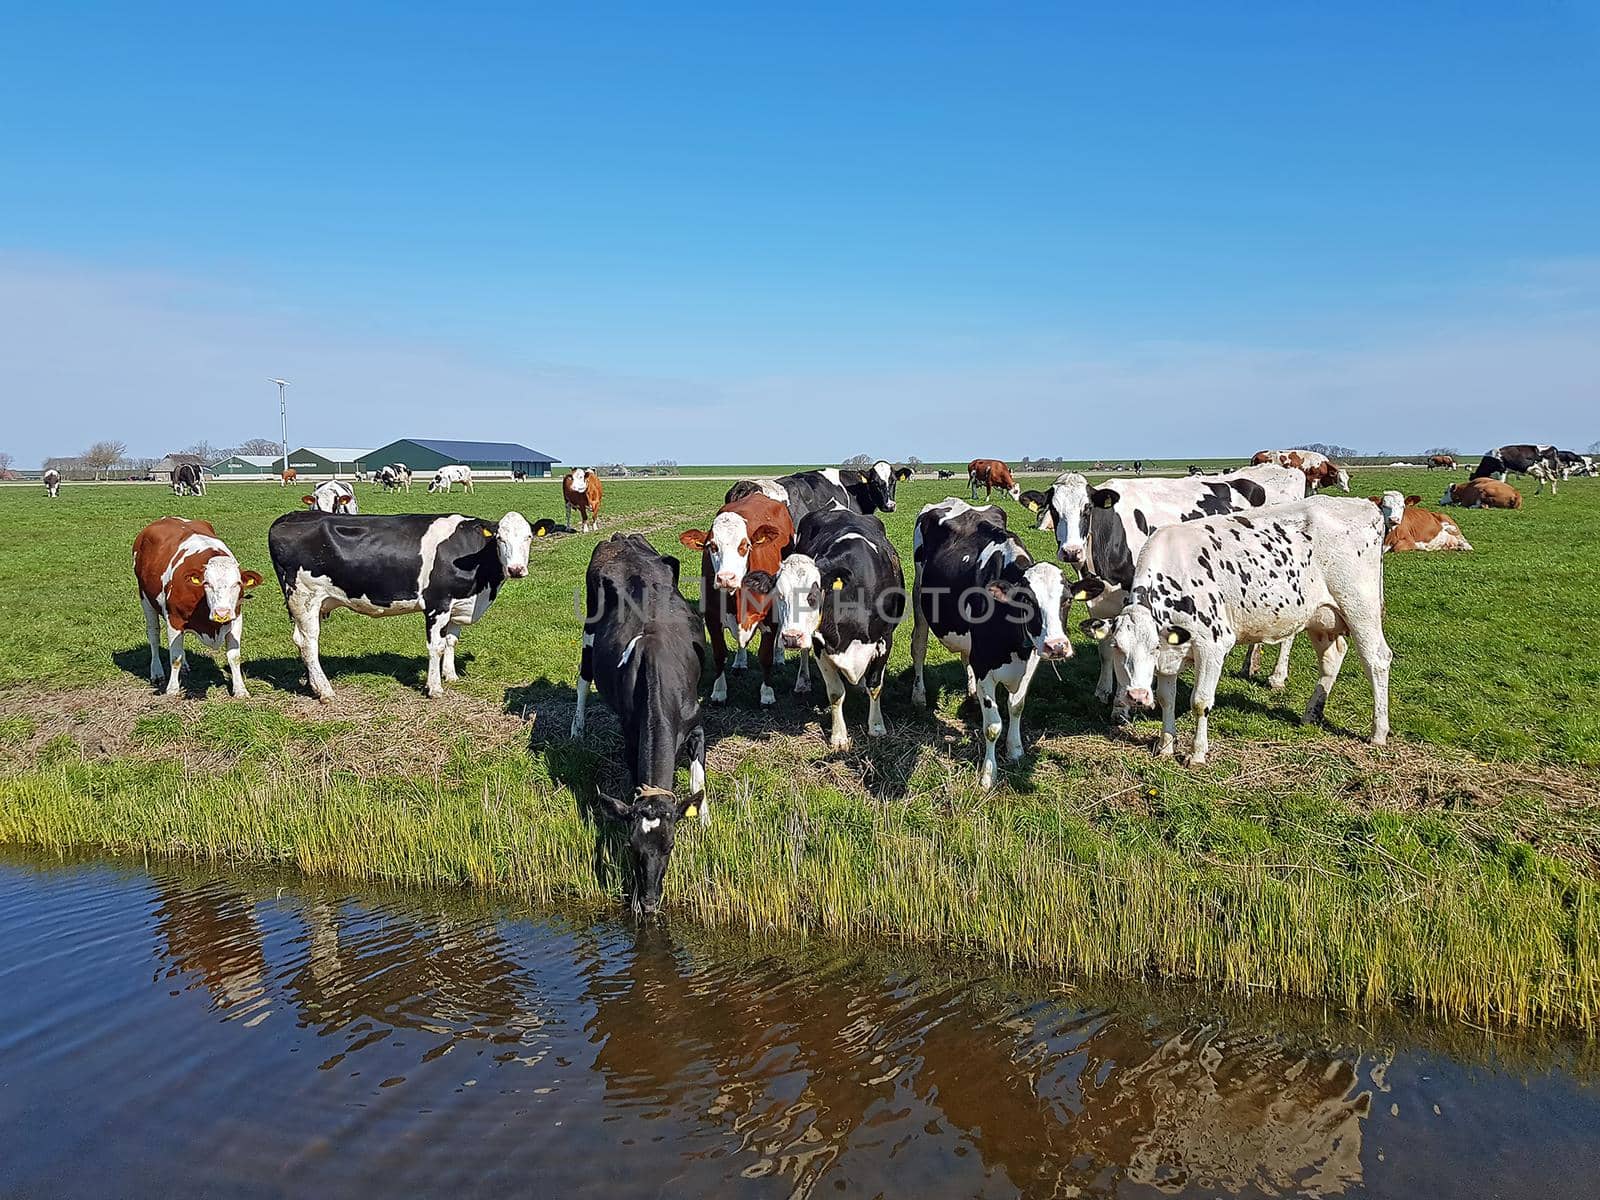 Cows in the meadow in the Netherlands in spring